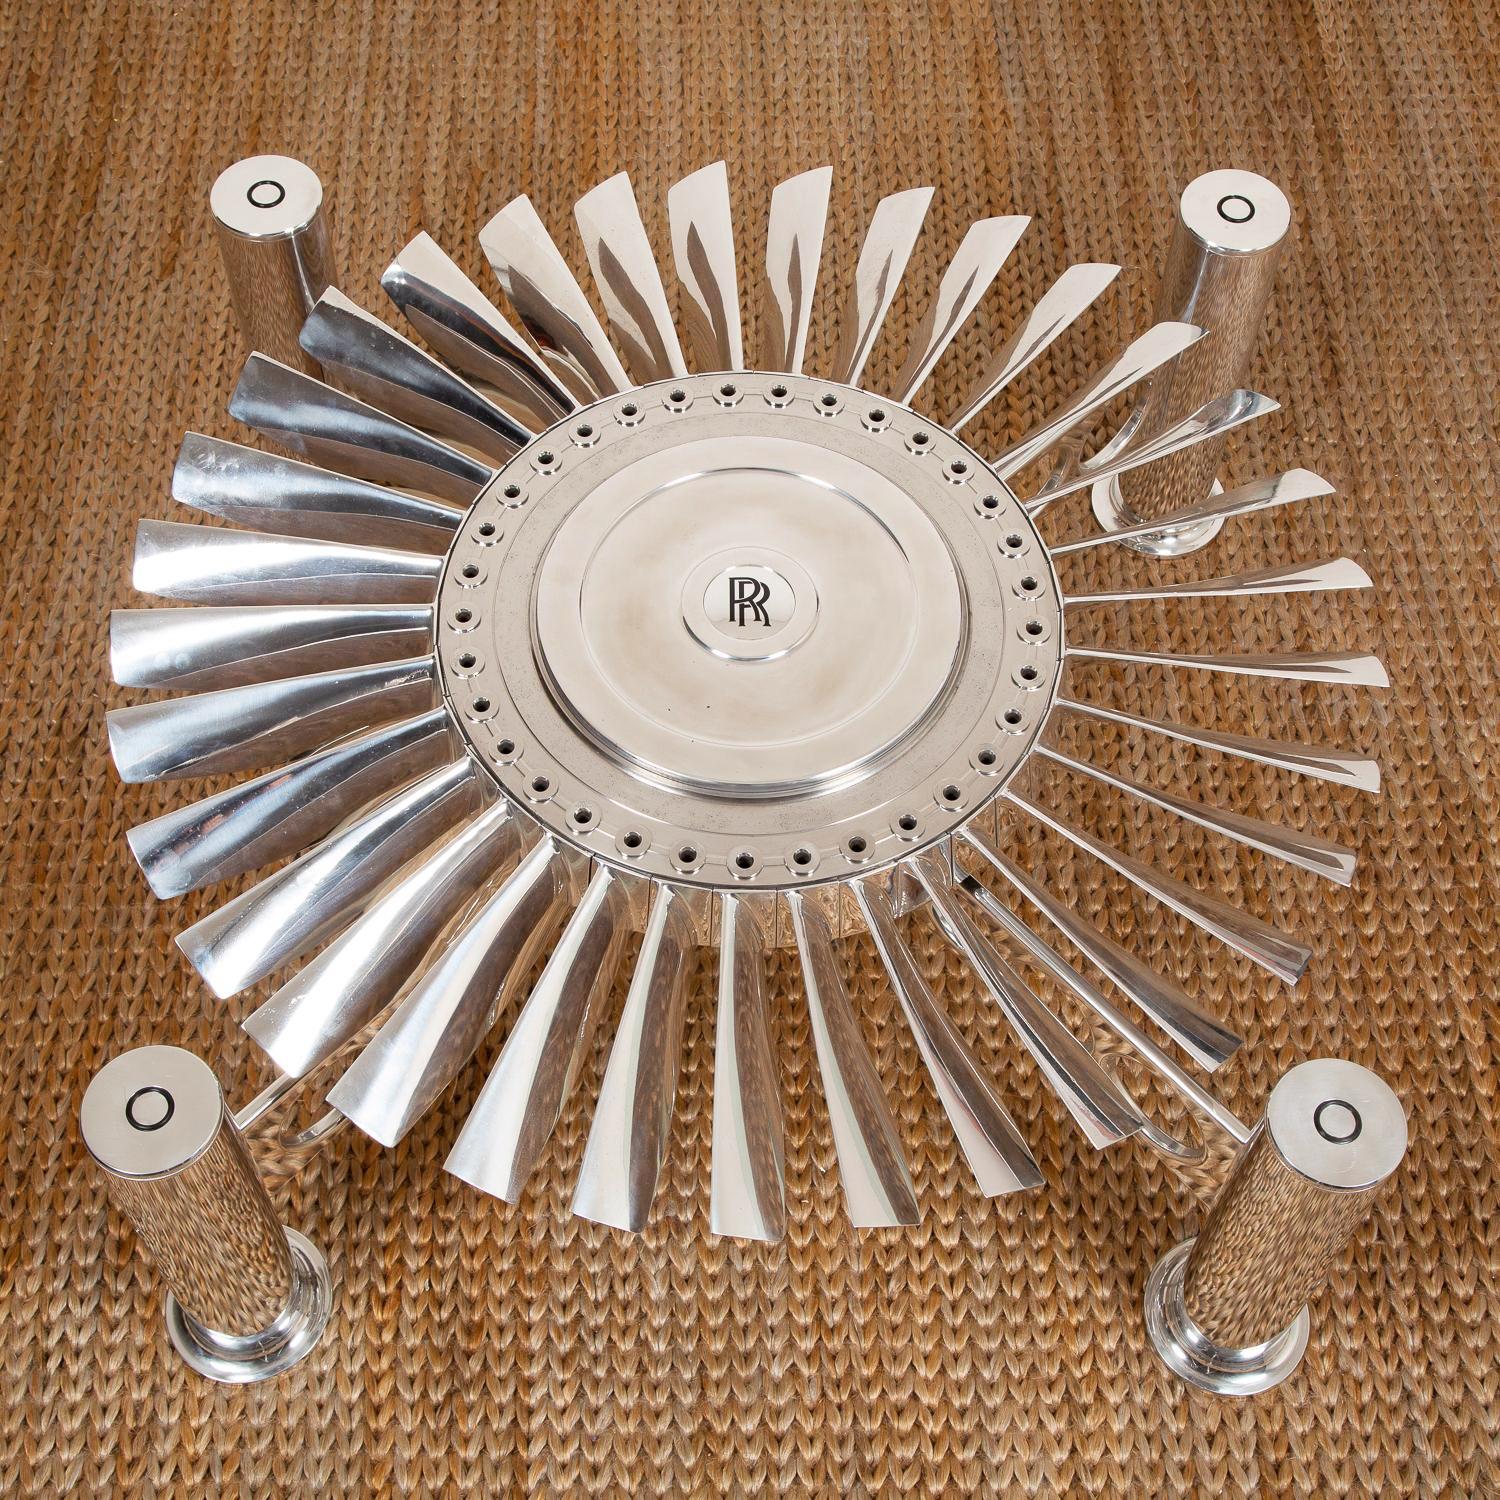 Coffee table Turbofan Rolls-Royce with turbine from
Rolls-Royce RB.80 Conway engine. With 110cm diameter
turbine in titanium which rotates under the glass top on
a polished aluminium base. With clear glass top, 
15mm thickness. Exceptional